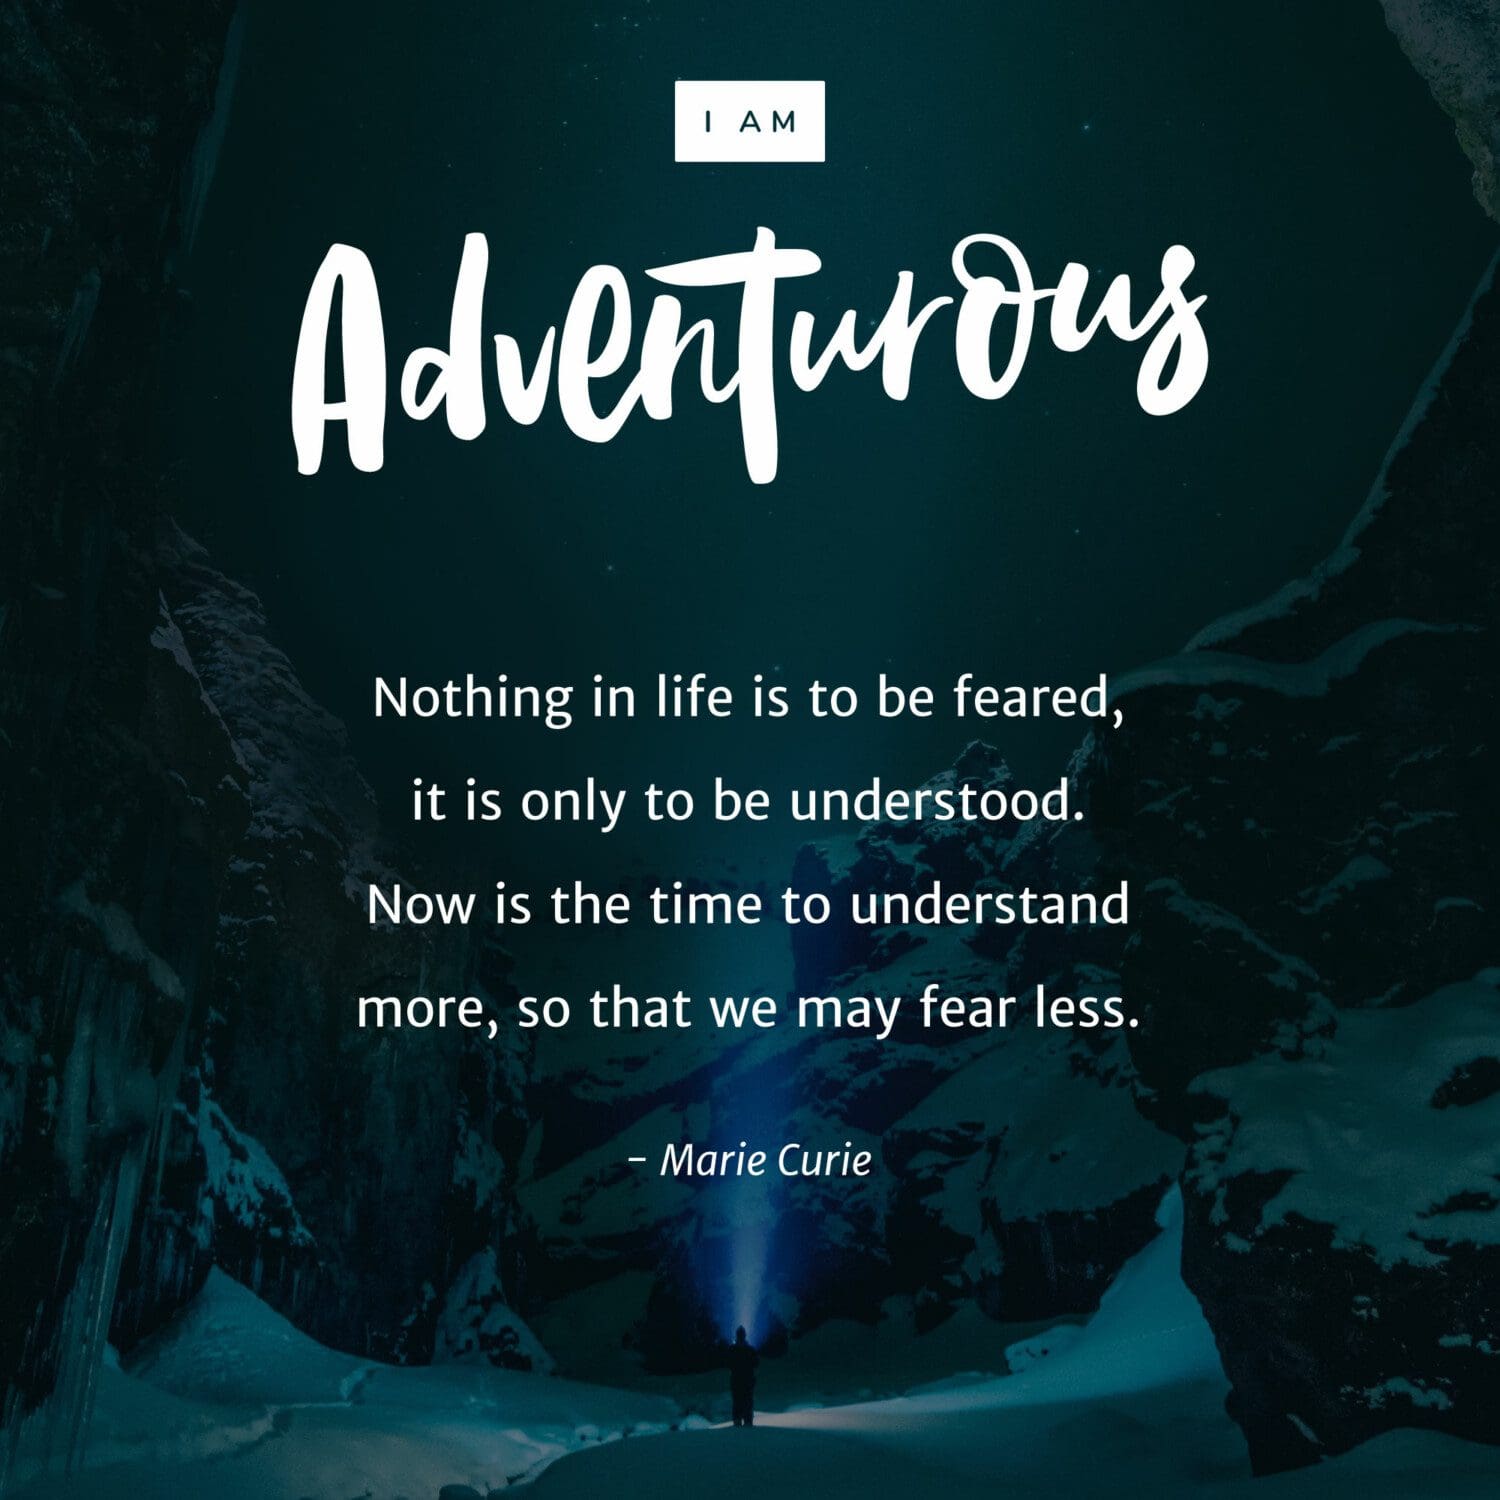 Adventurous quote by Marie Curie